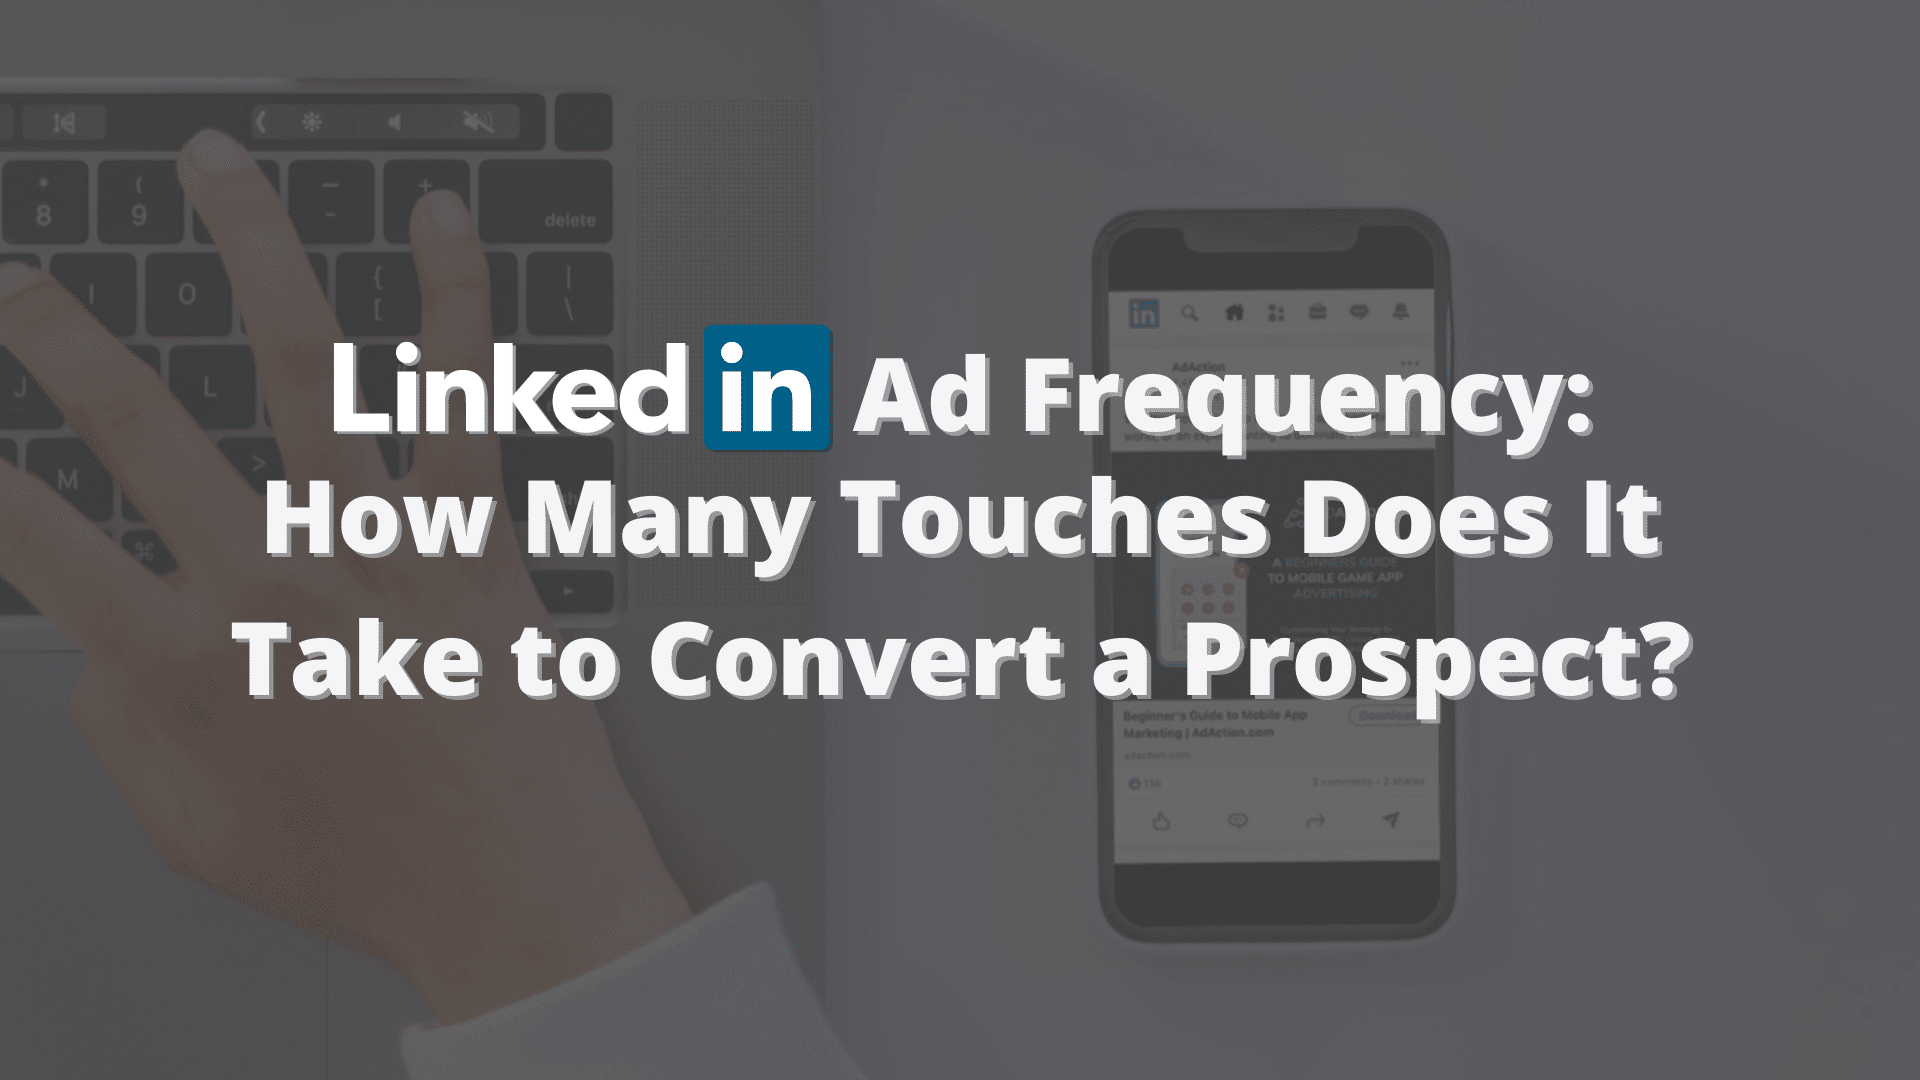 LinkedIn Ads Frequency How Many Touches Does It Take to Convert a Prospect